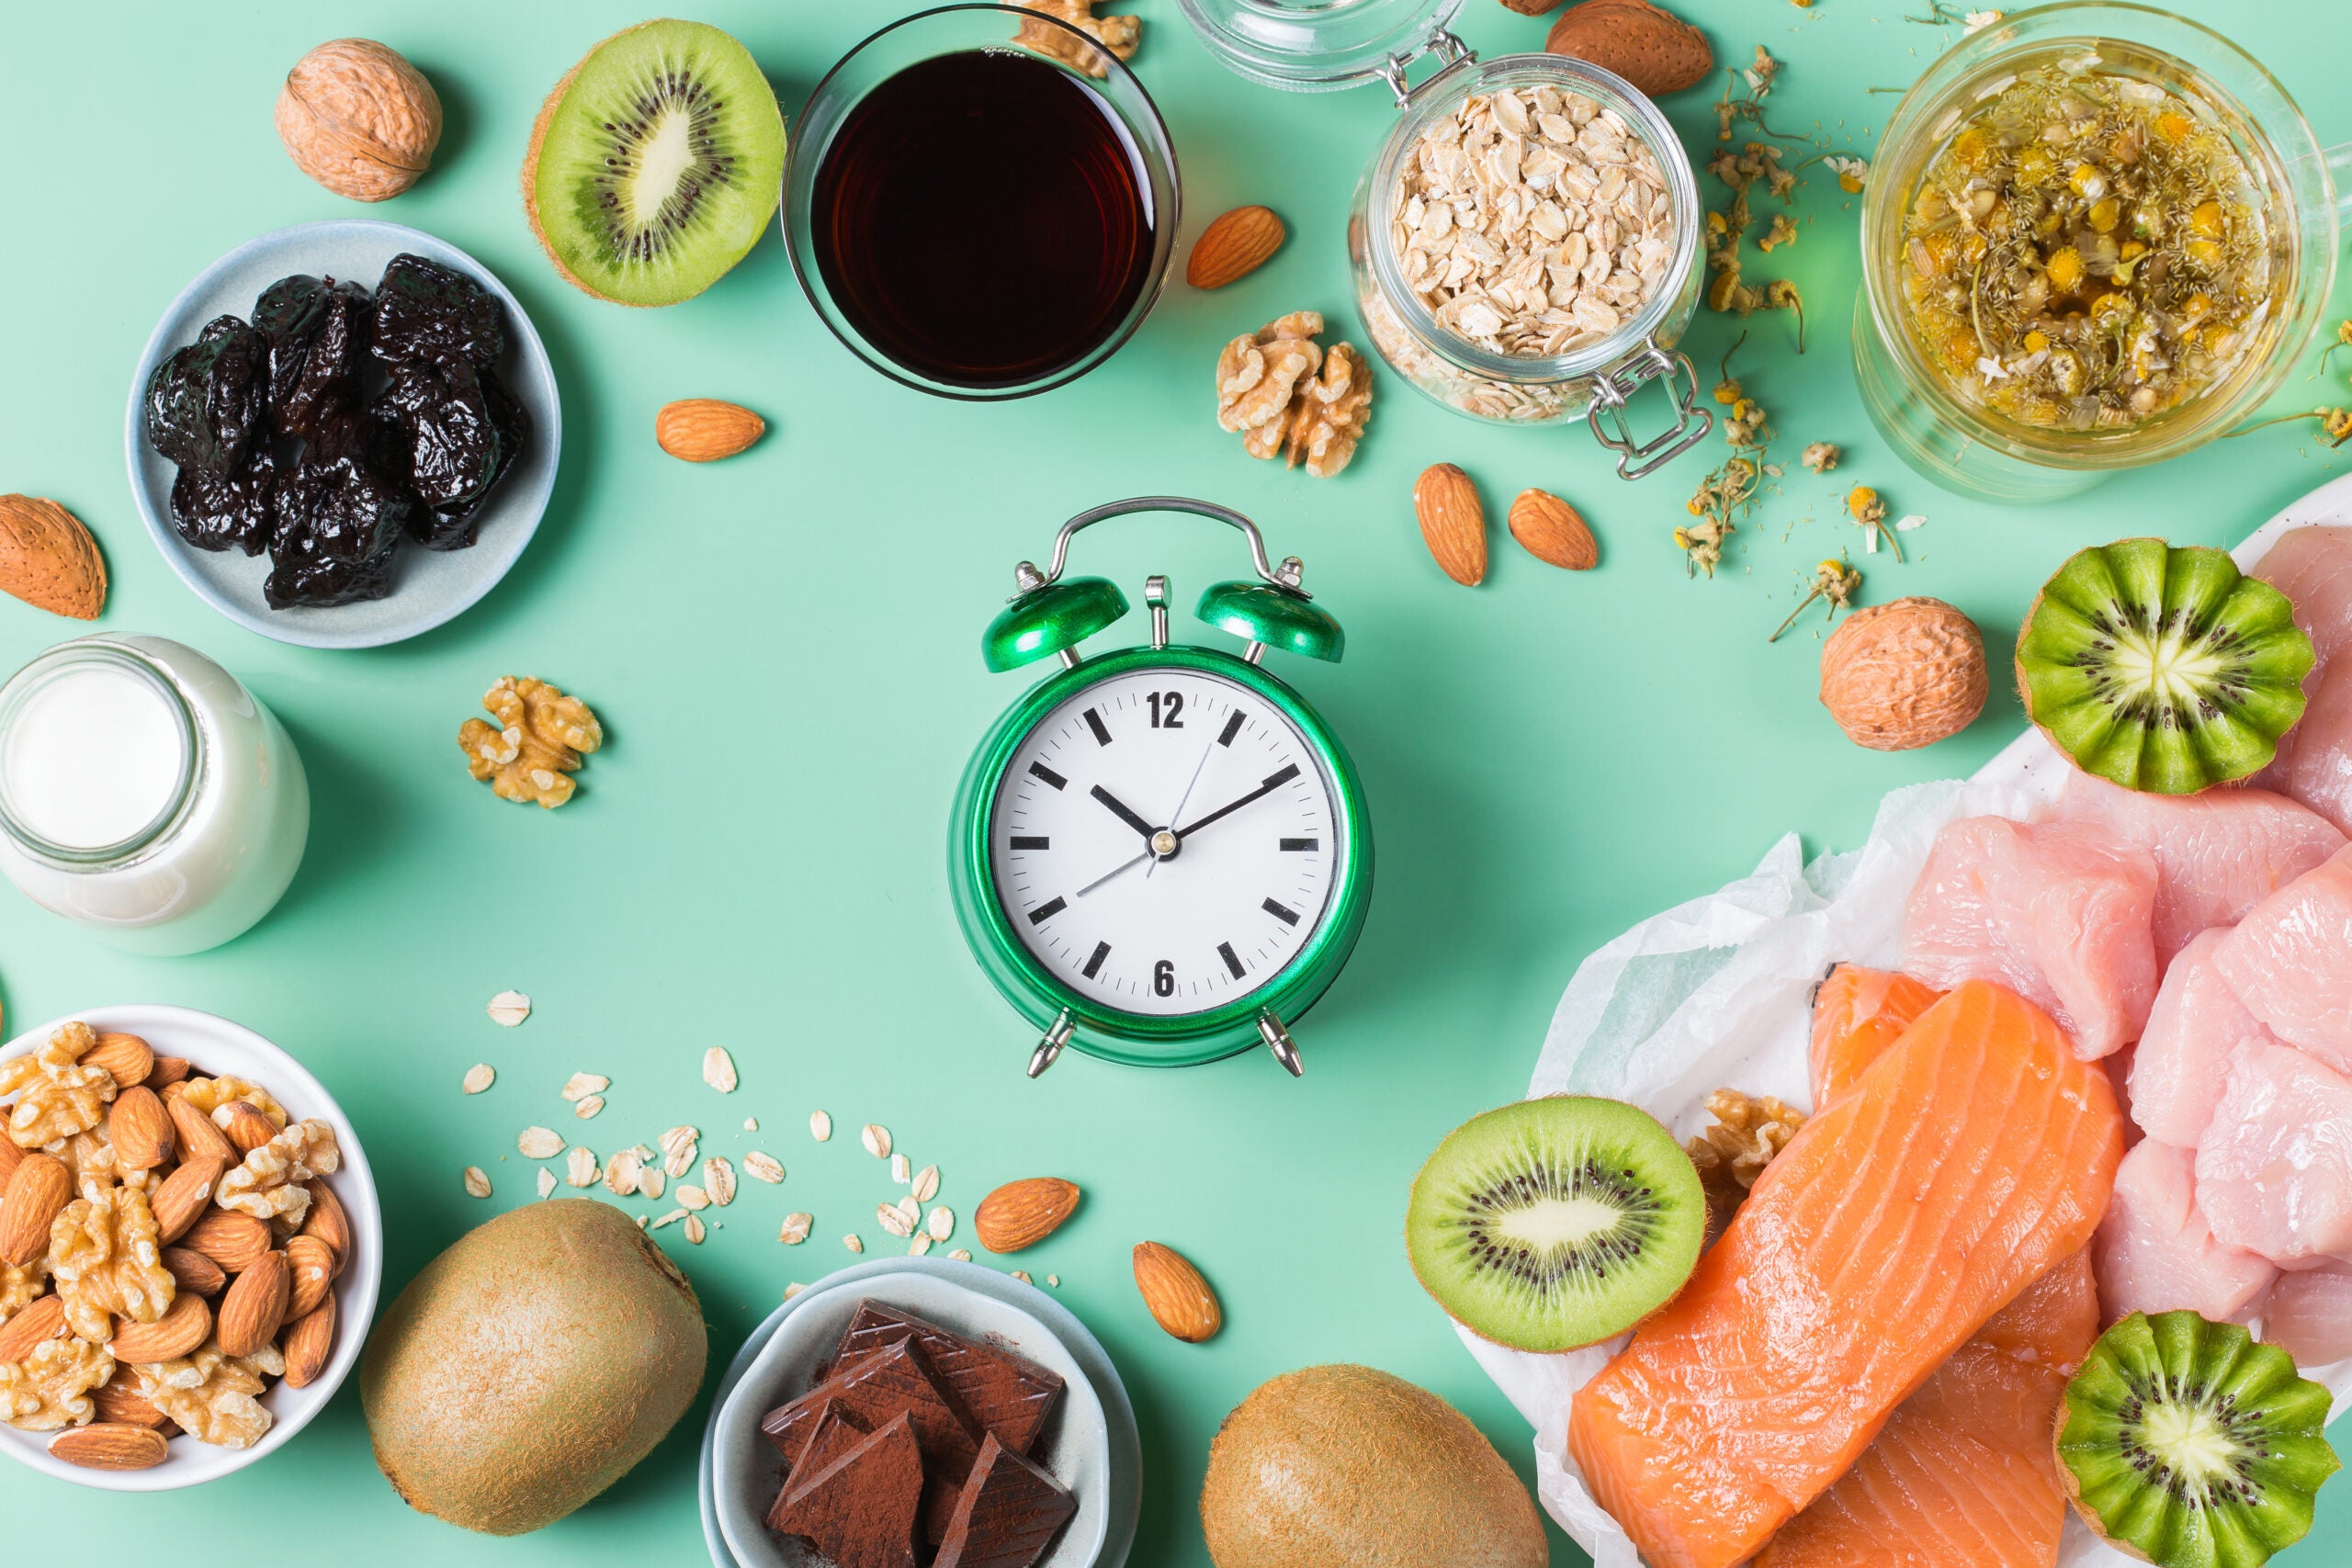 Flat lay of a green clock surrounded by salmon, kiwi, nuts, oatmeal, and tart cherry juice. Showing that intermittent fasting and nutrition can increase mitochondrial health and energy production.